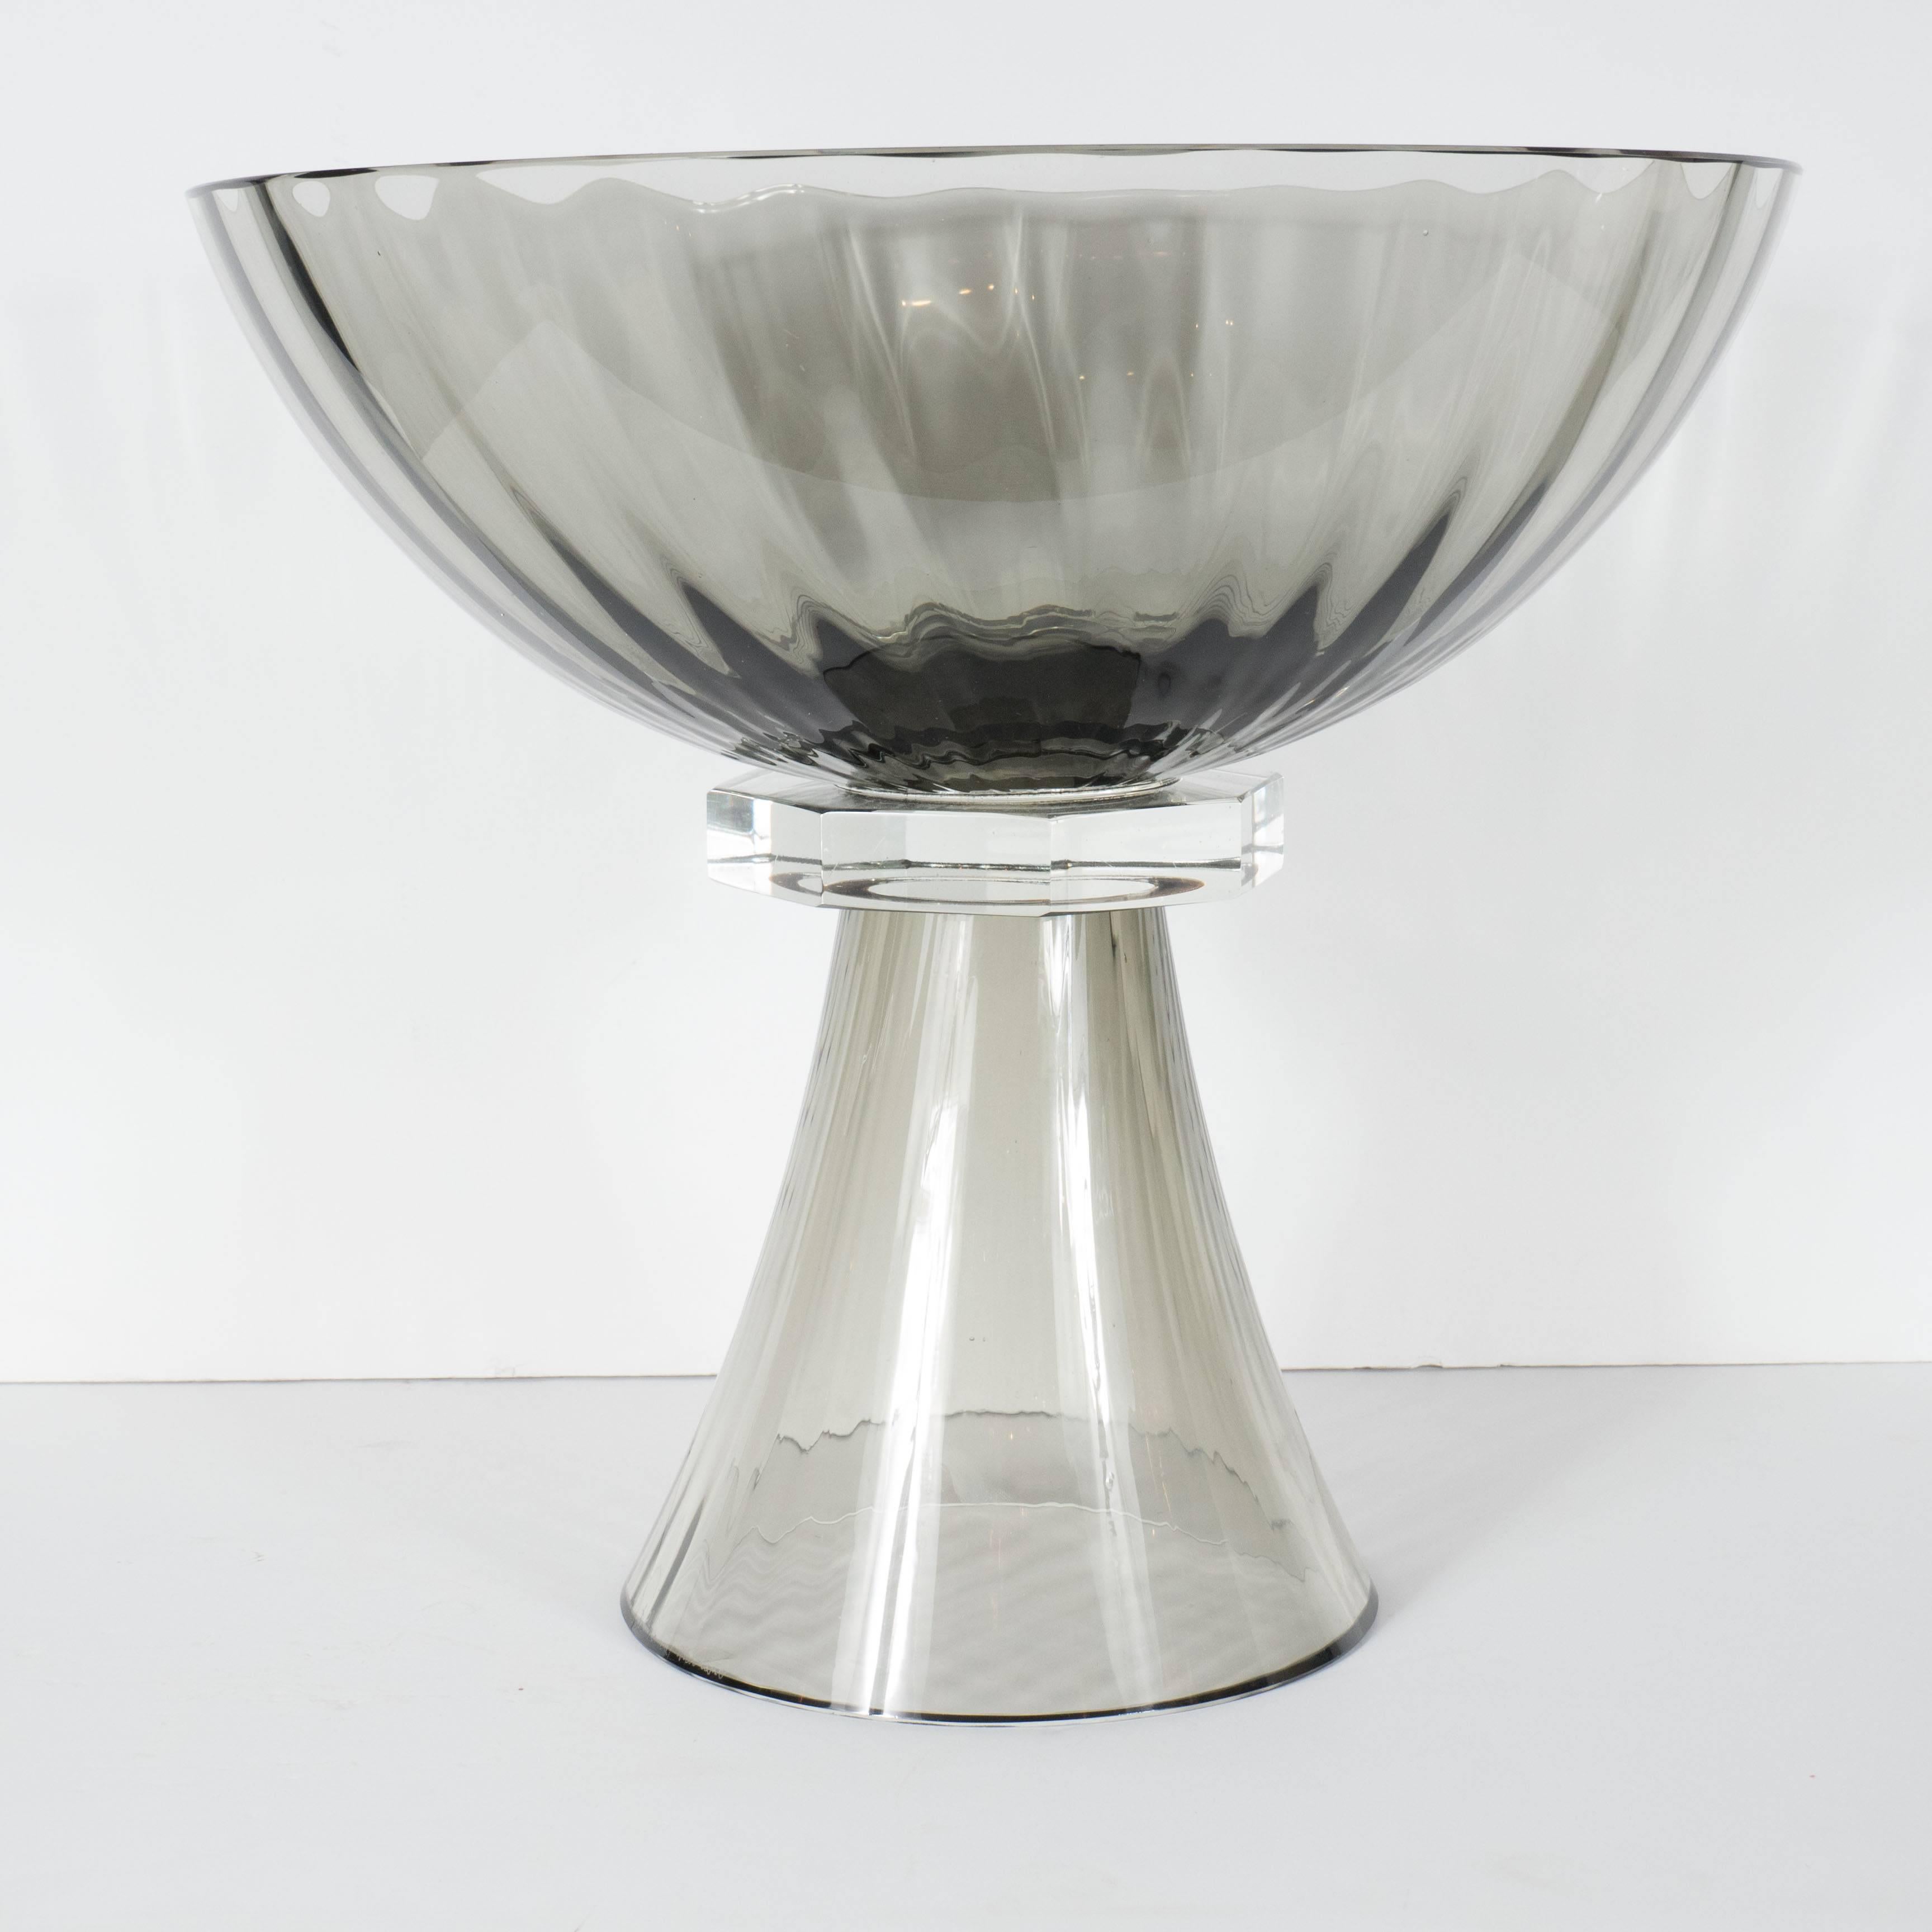 Contemporary Murano Glass Modernist Bowl or Vase in Handblown Smoked Glass